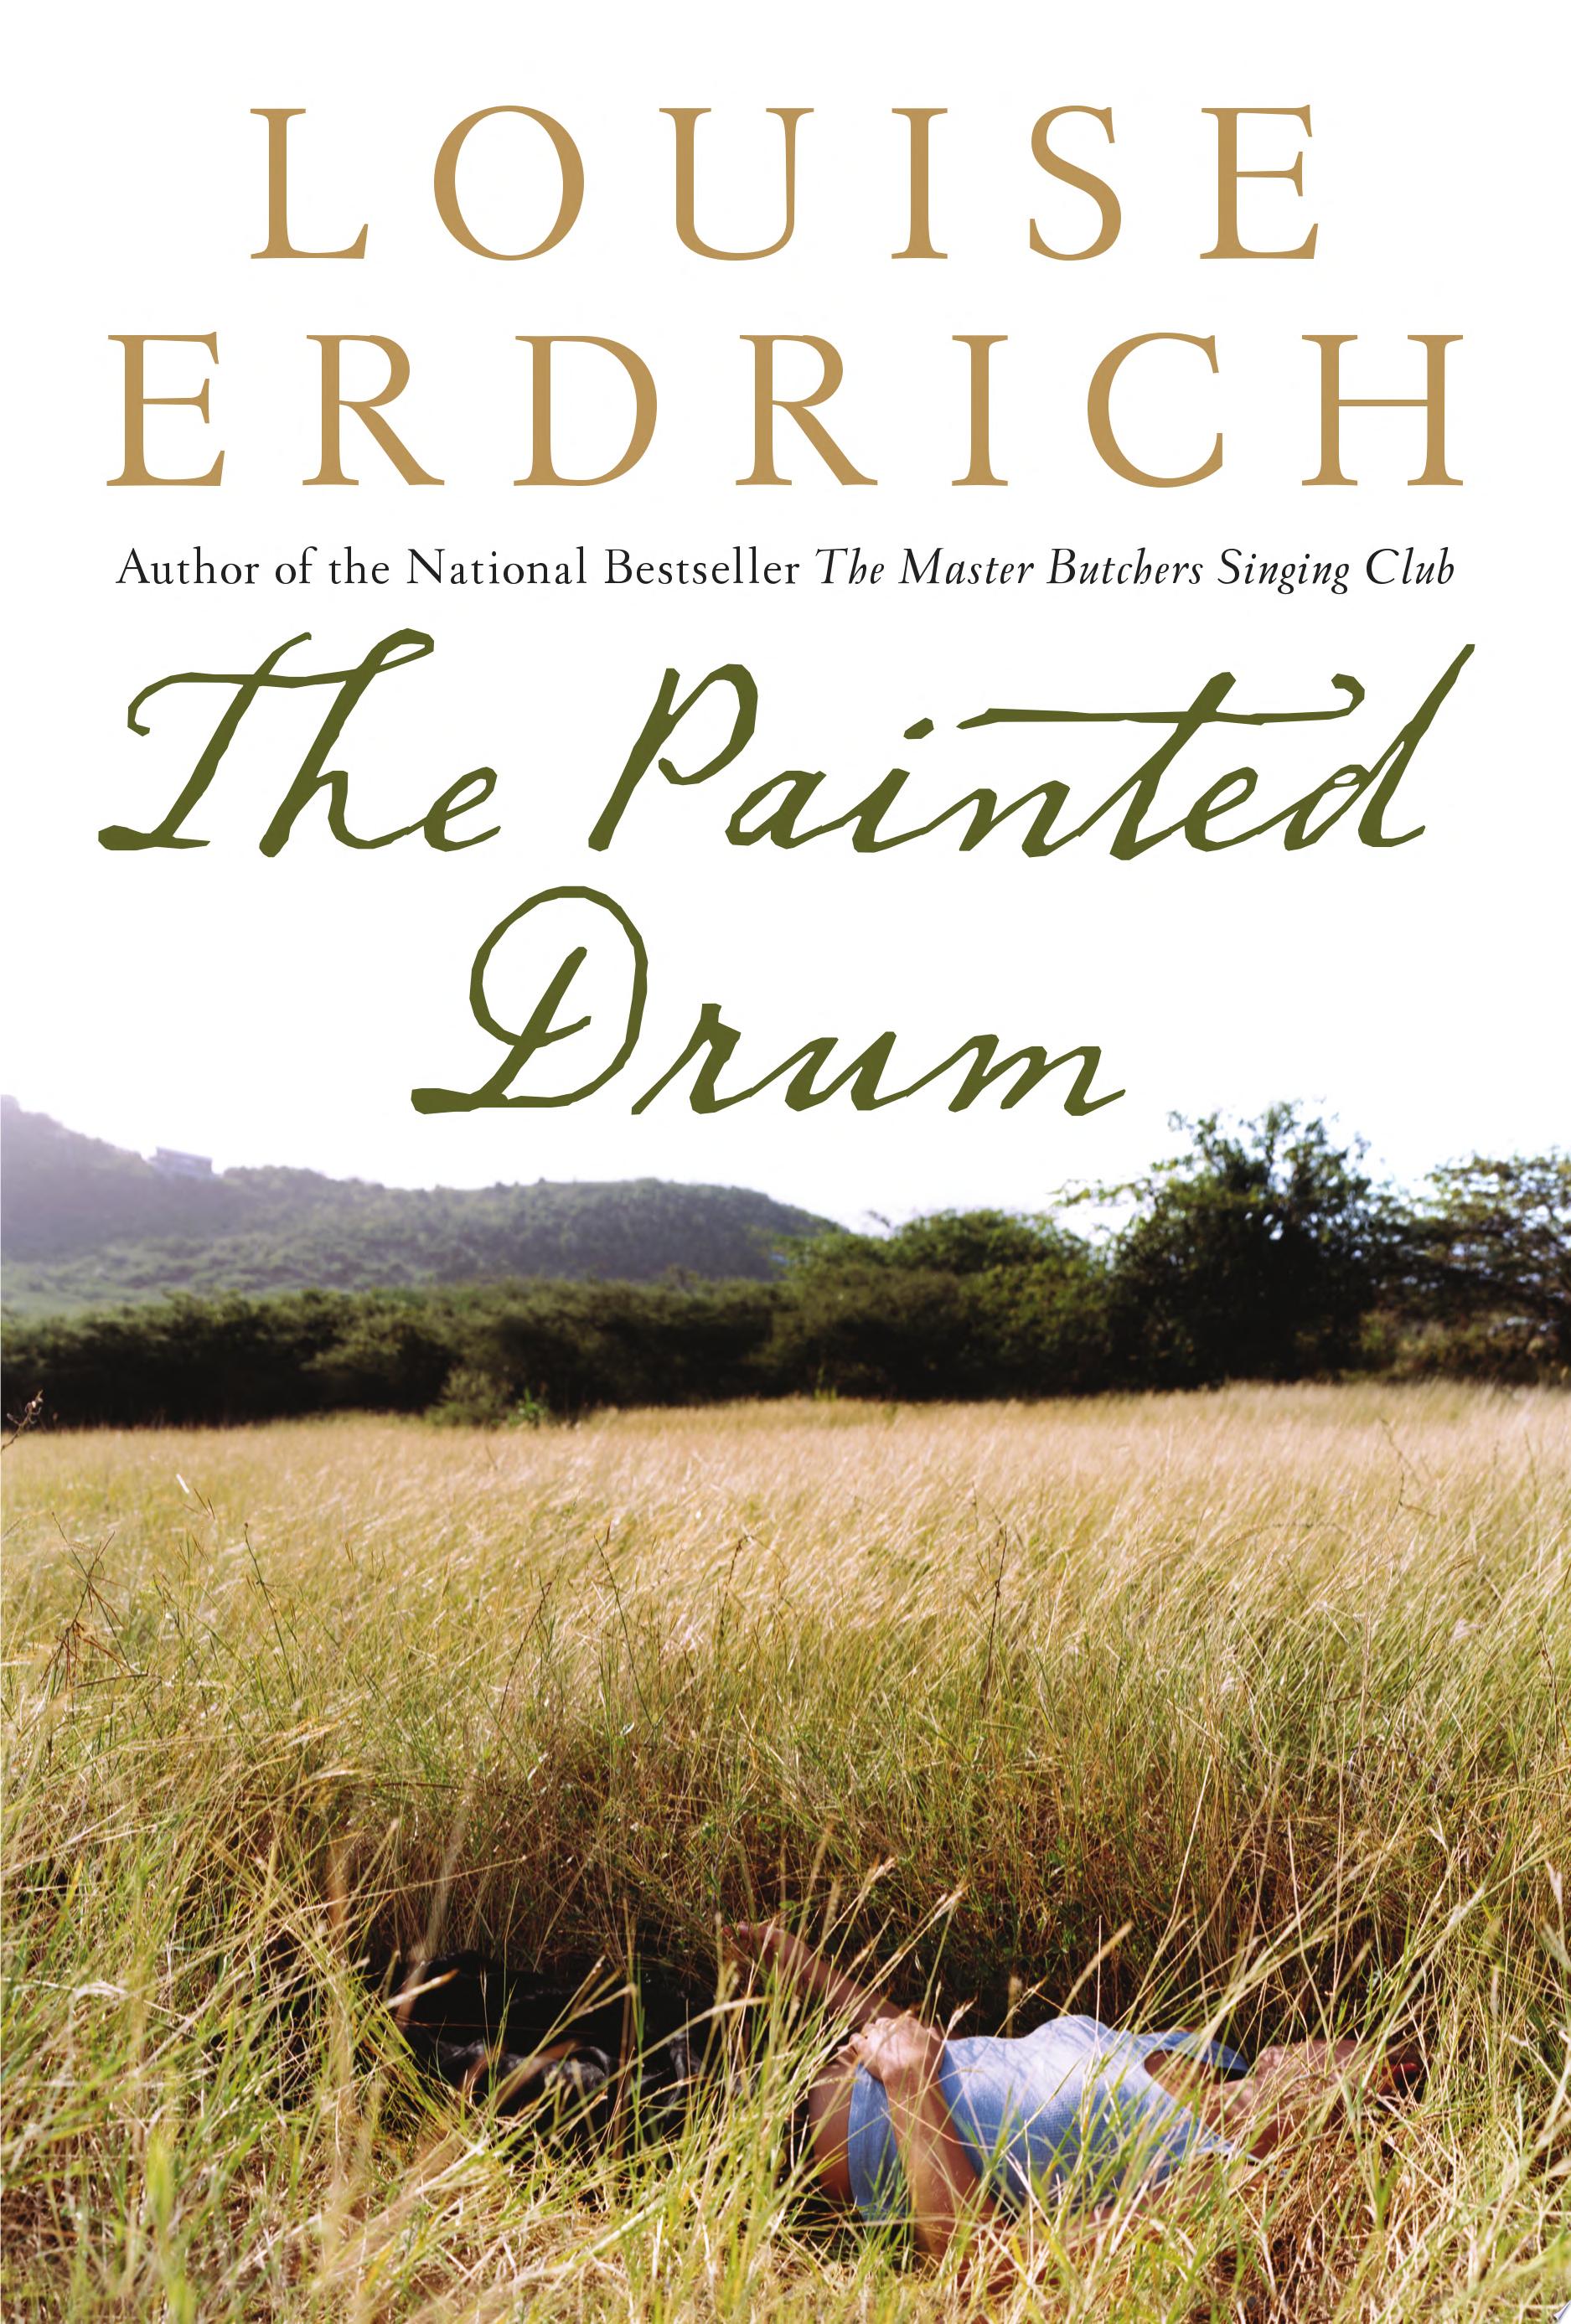 Image for "The Painted Drum"